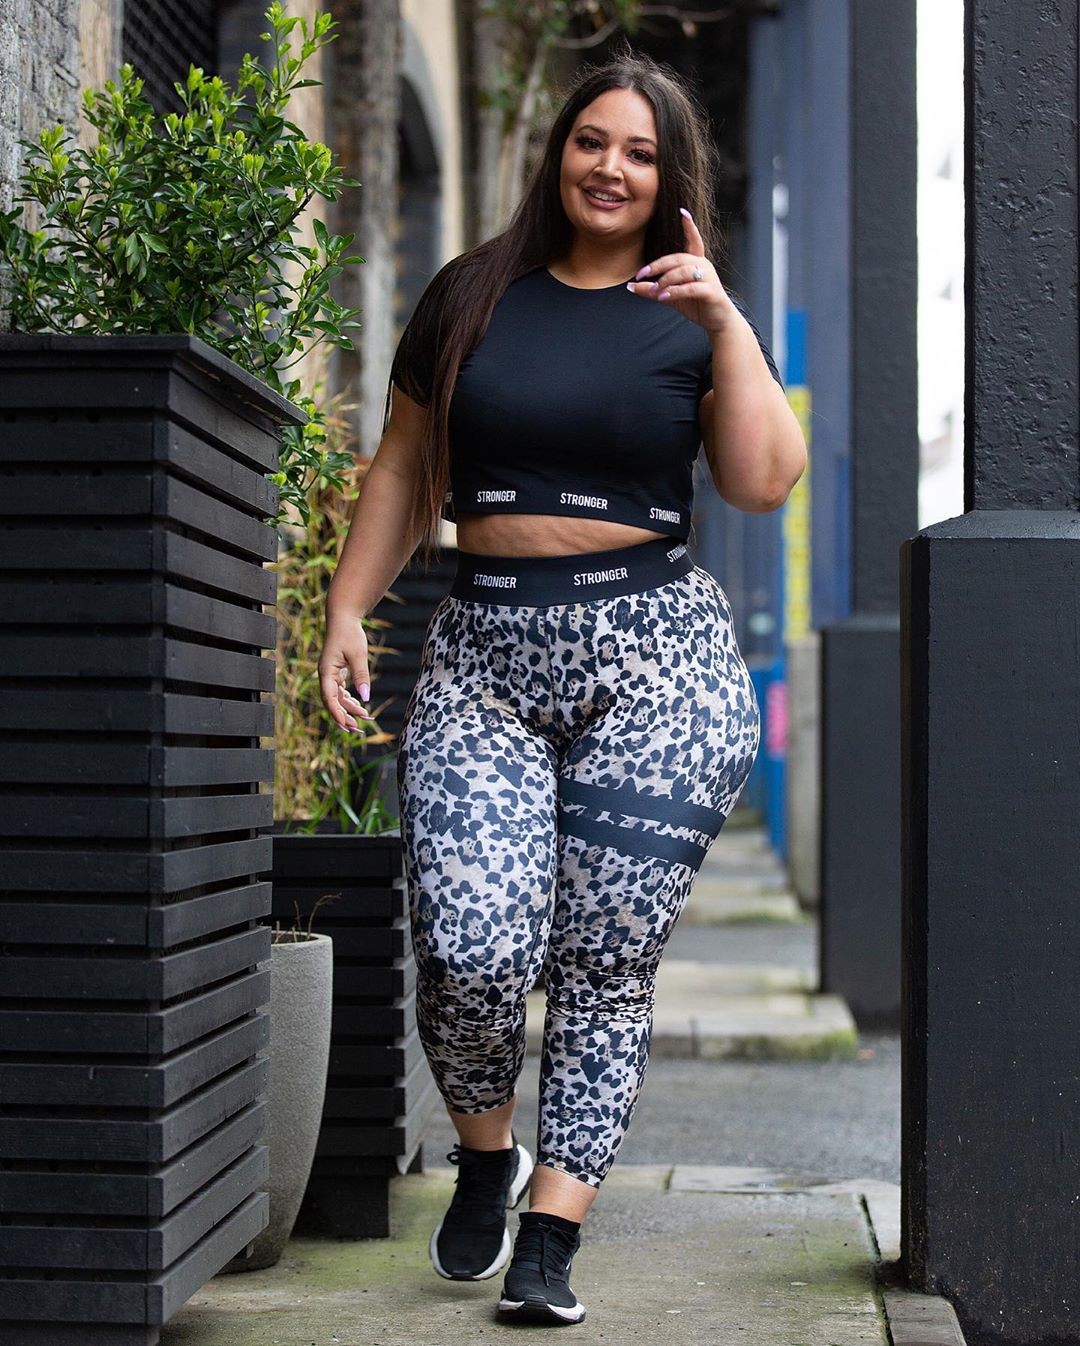 Plus Size sportswear, leggings, trousers colour outfit: Crop top,  shirts,  Sportswear,  Leggings,  Tights,  Beige Trench Coat  